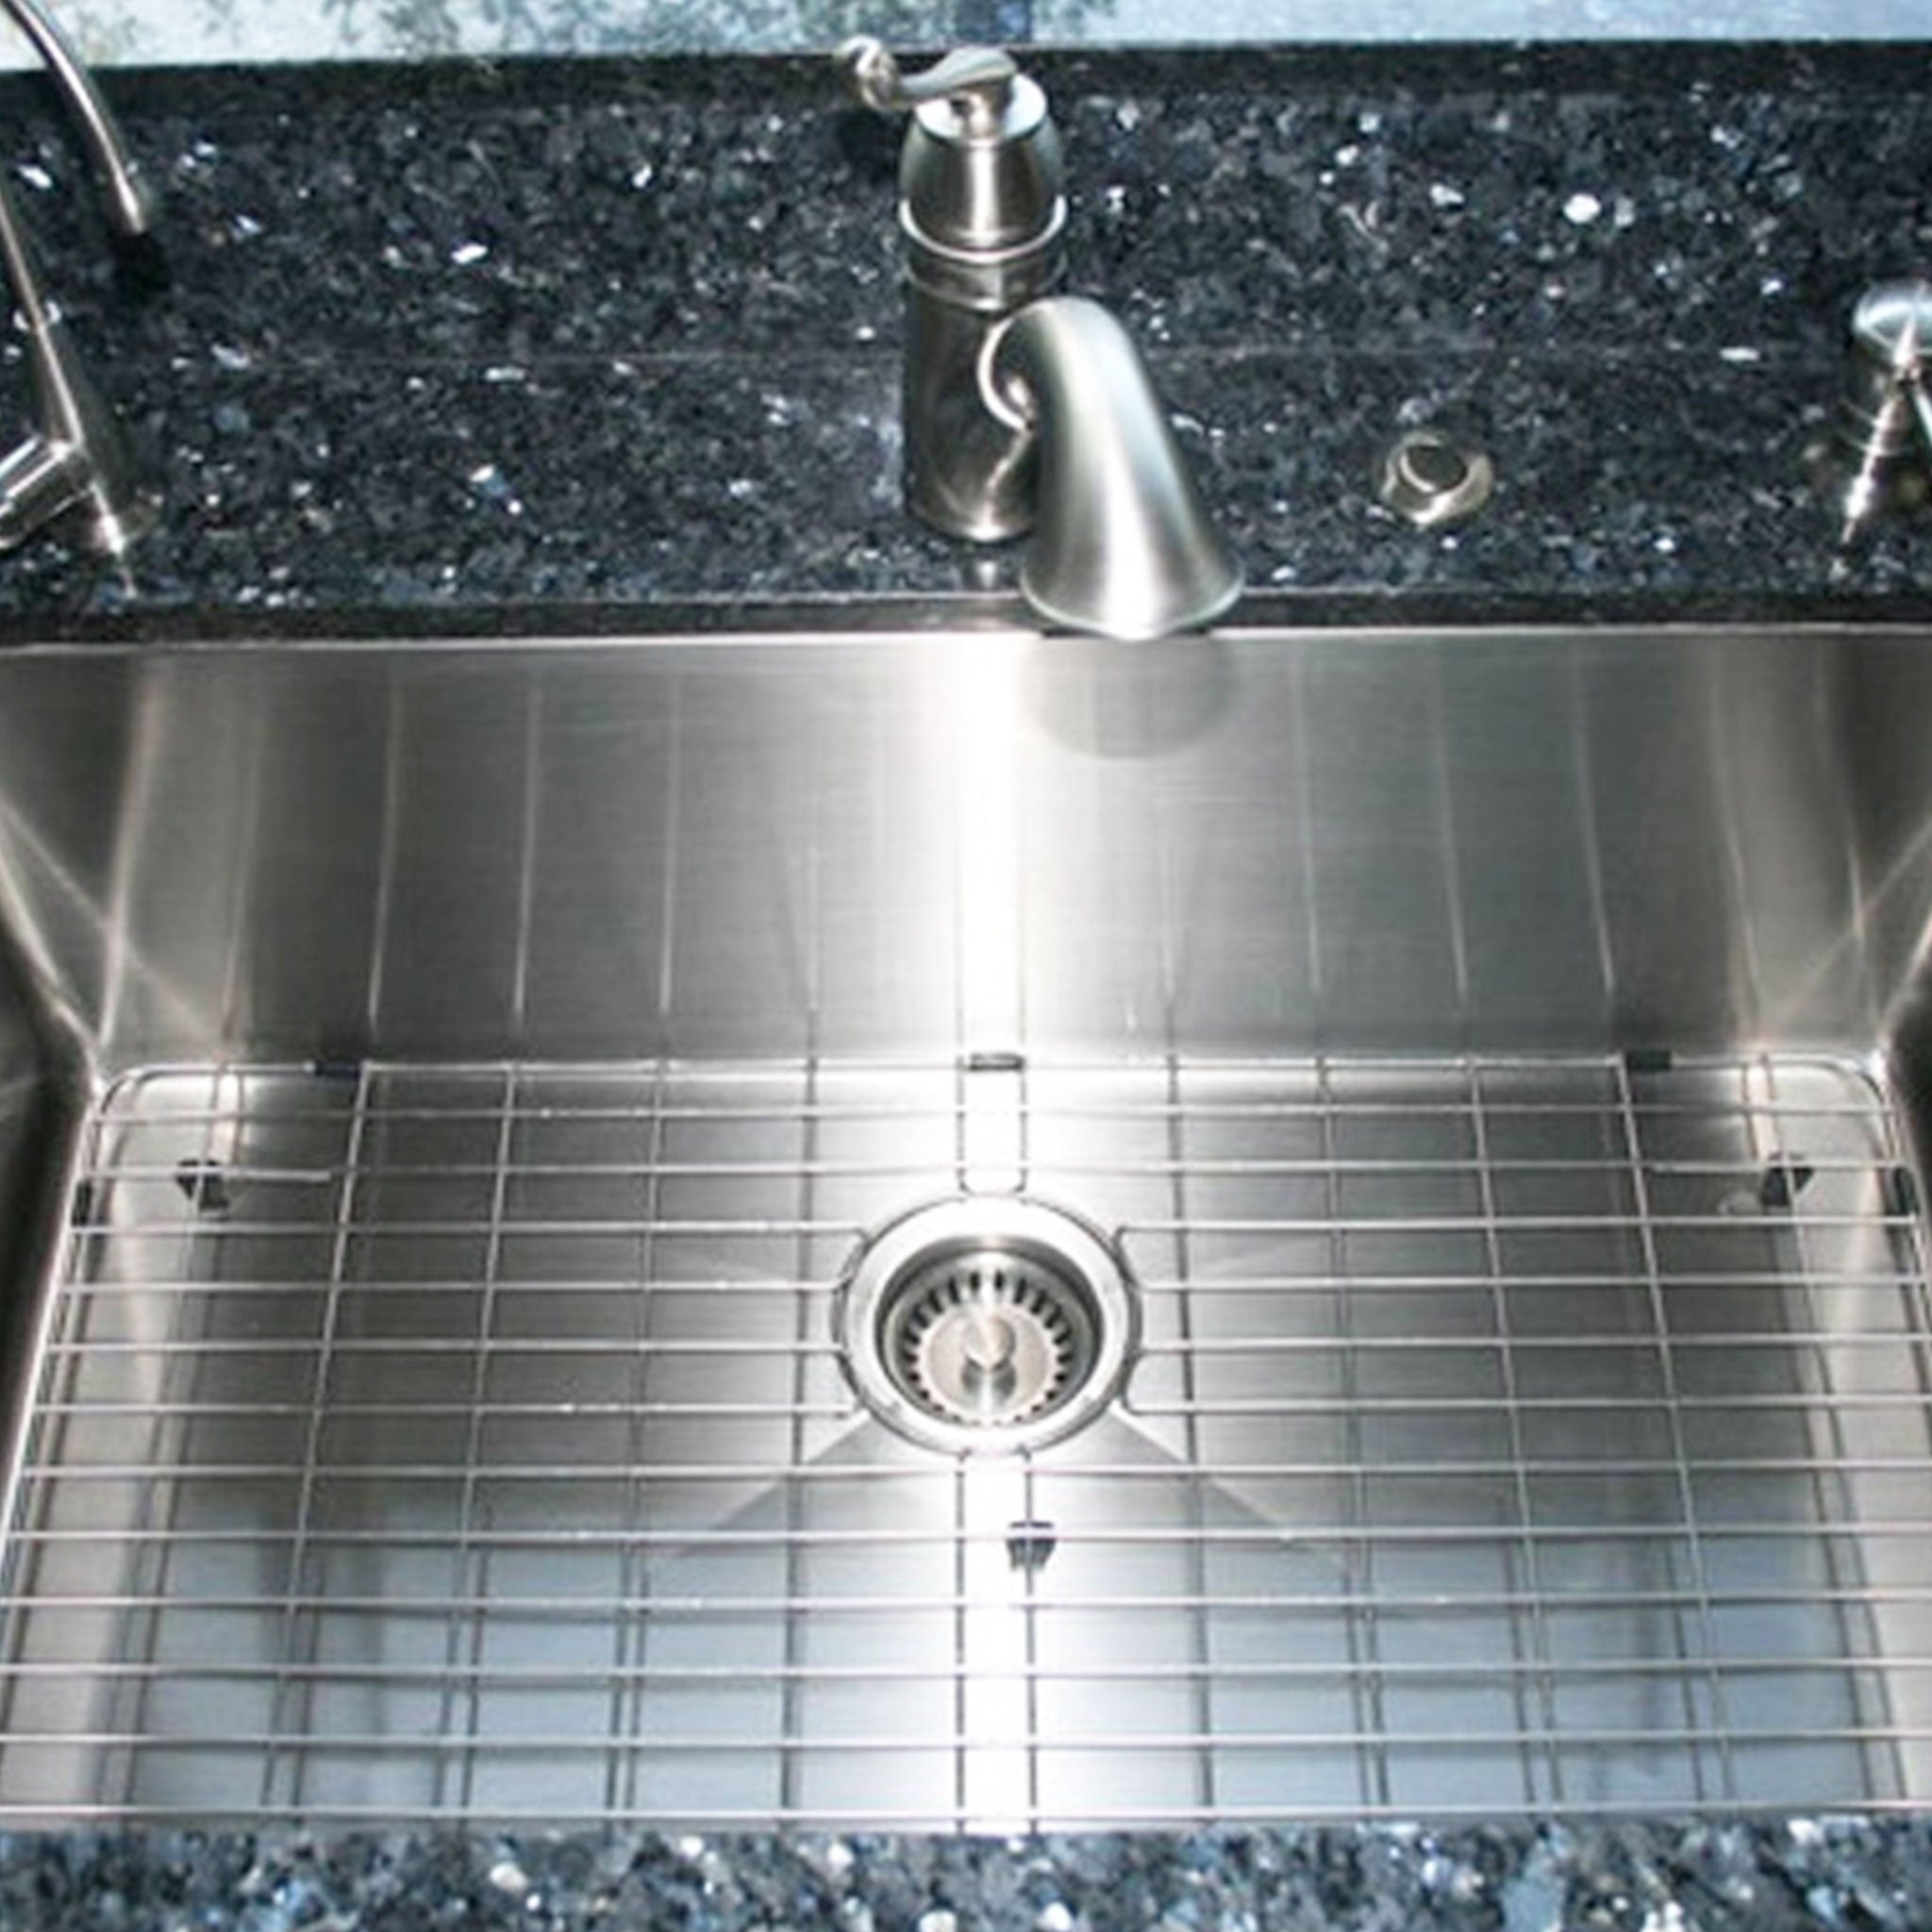 Products GRID - 32" stainless steel sink grid - center drain